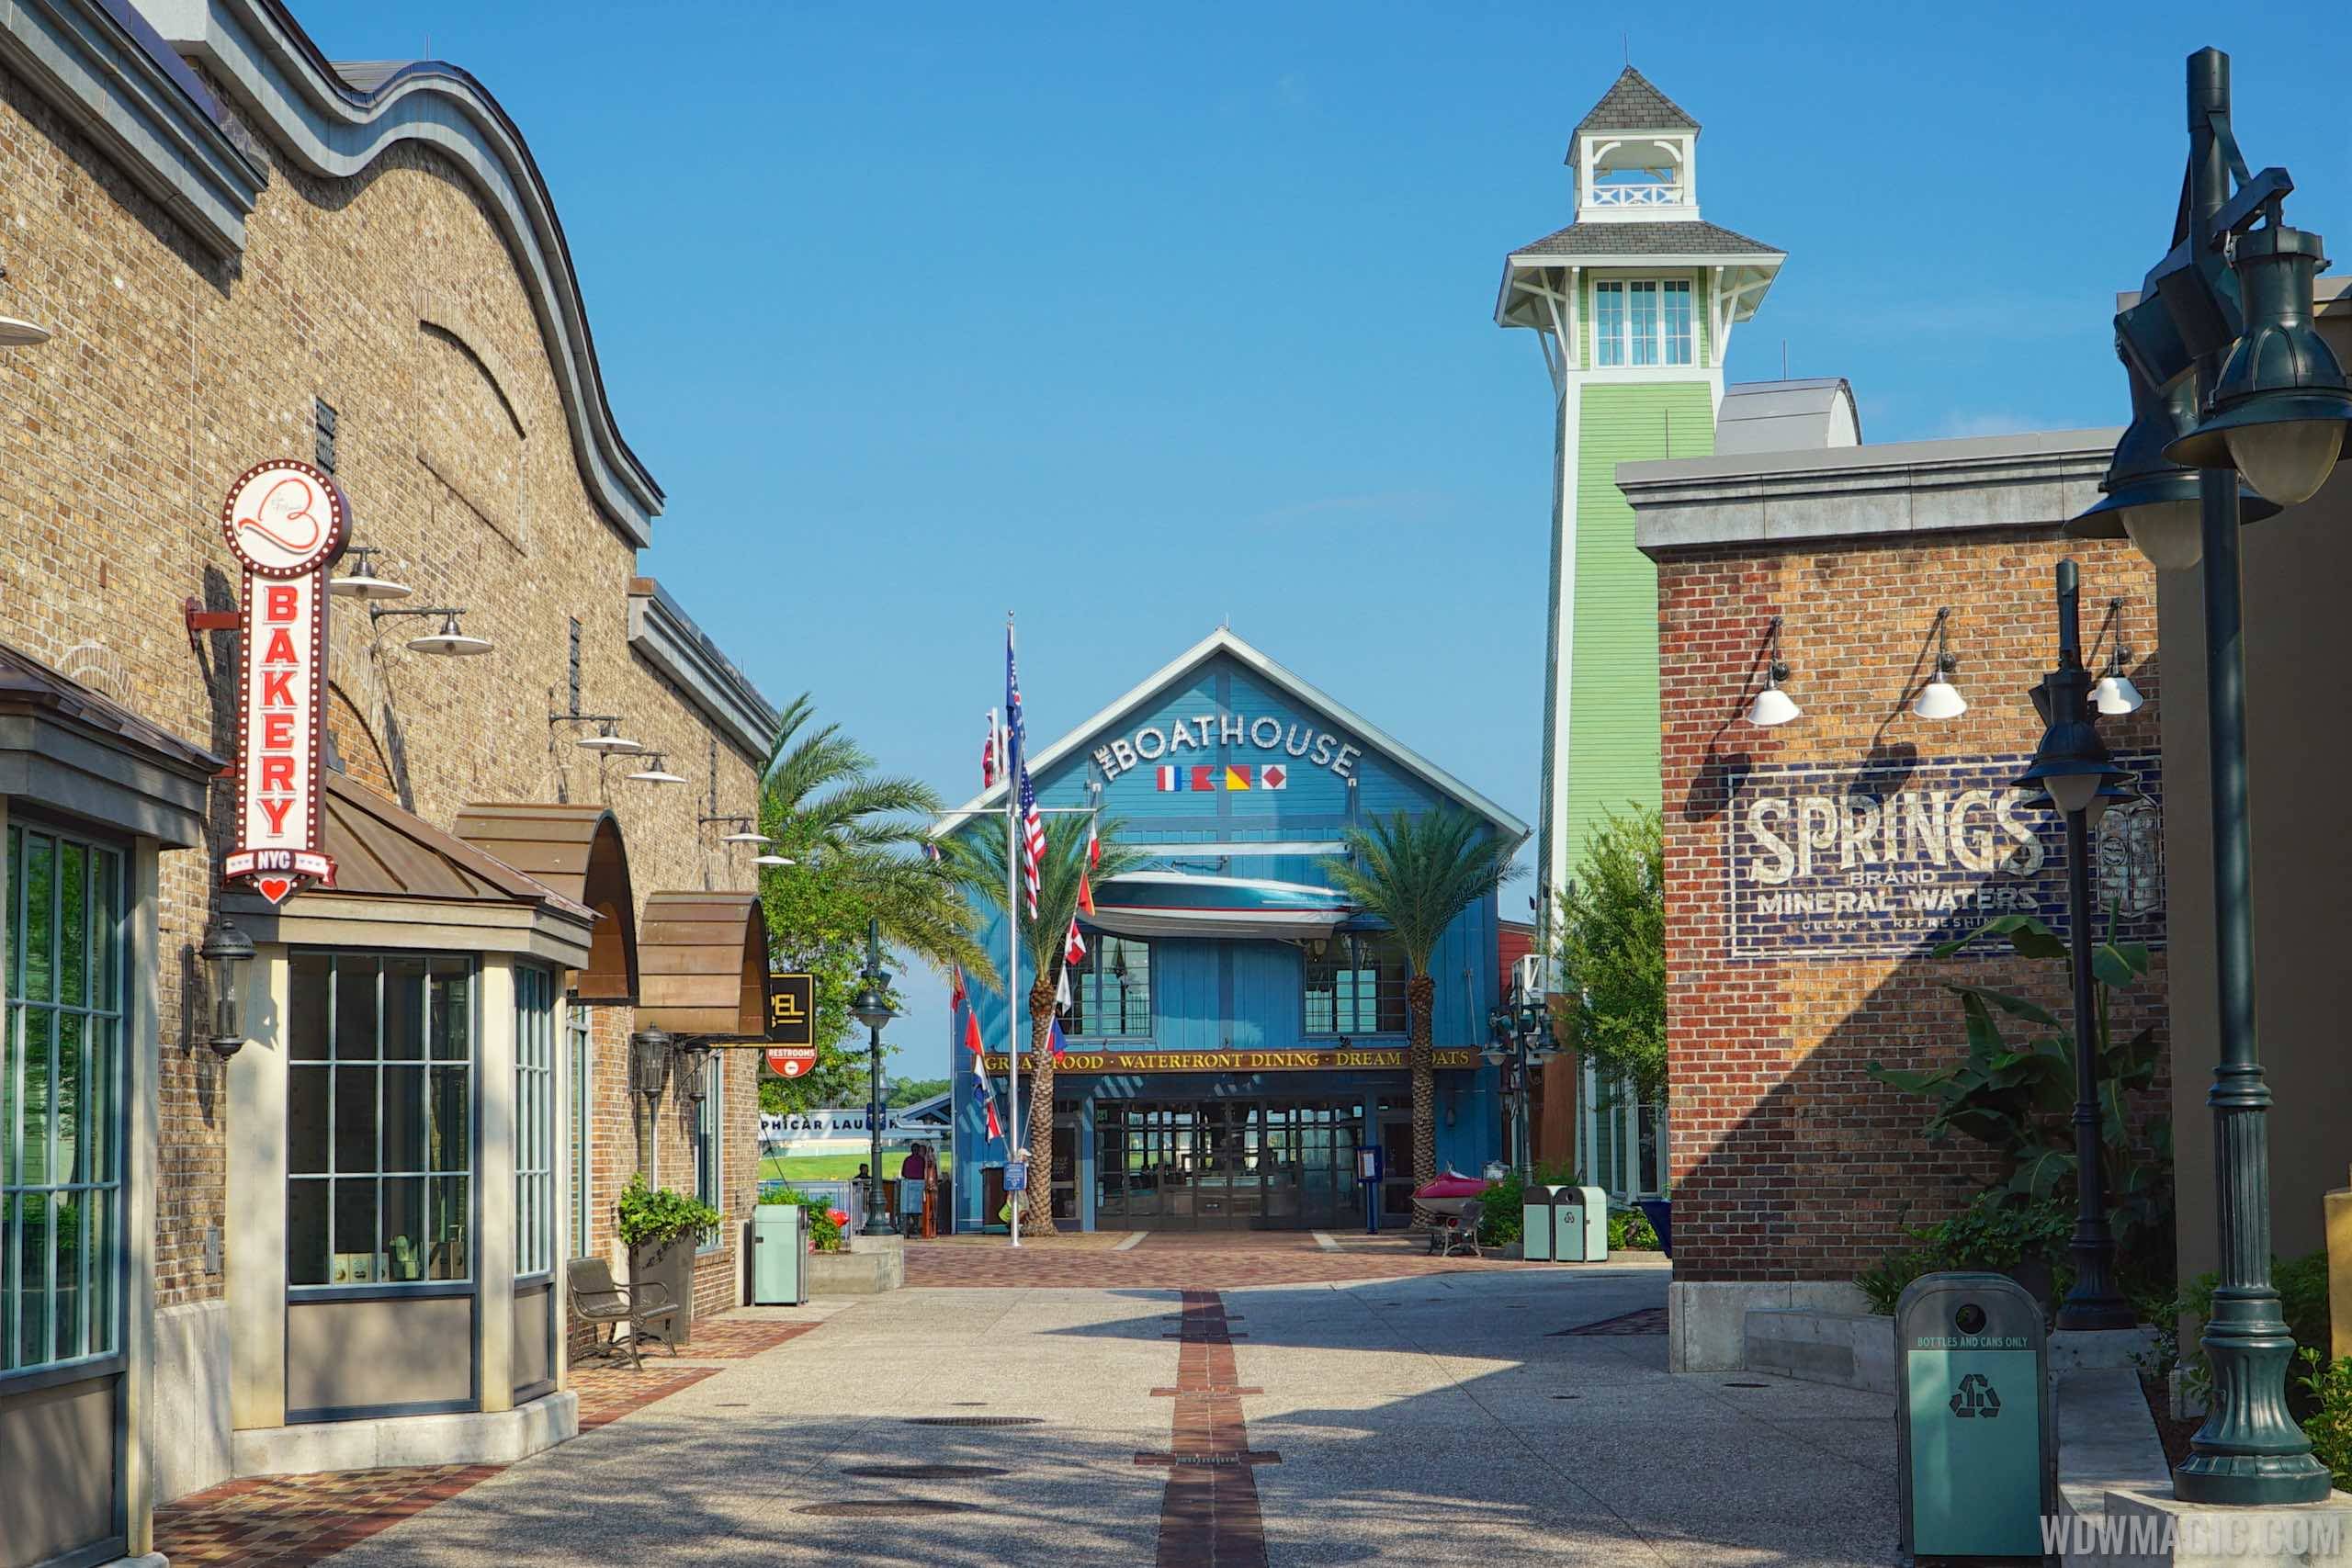 New 'Guest Shipping Station' coming to Disney Springs